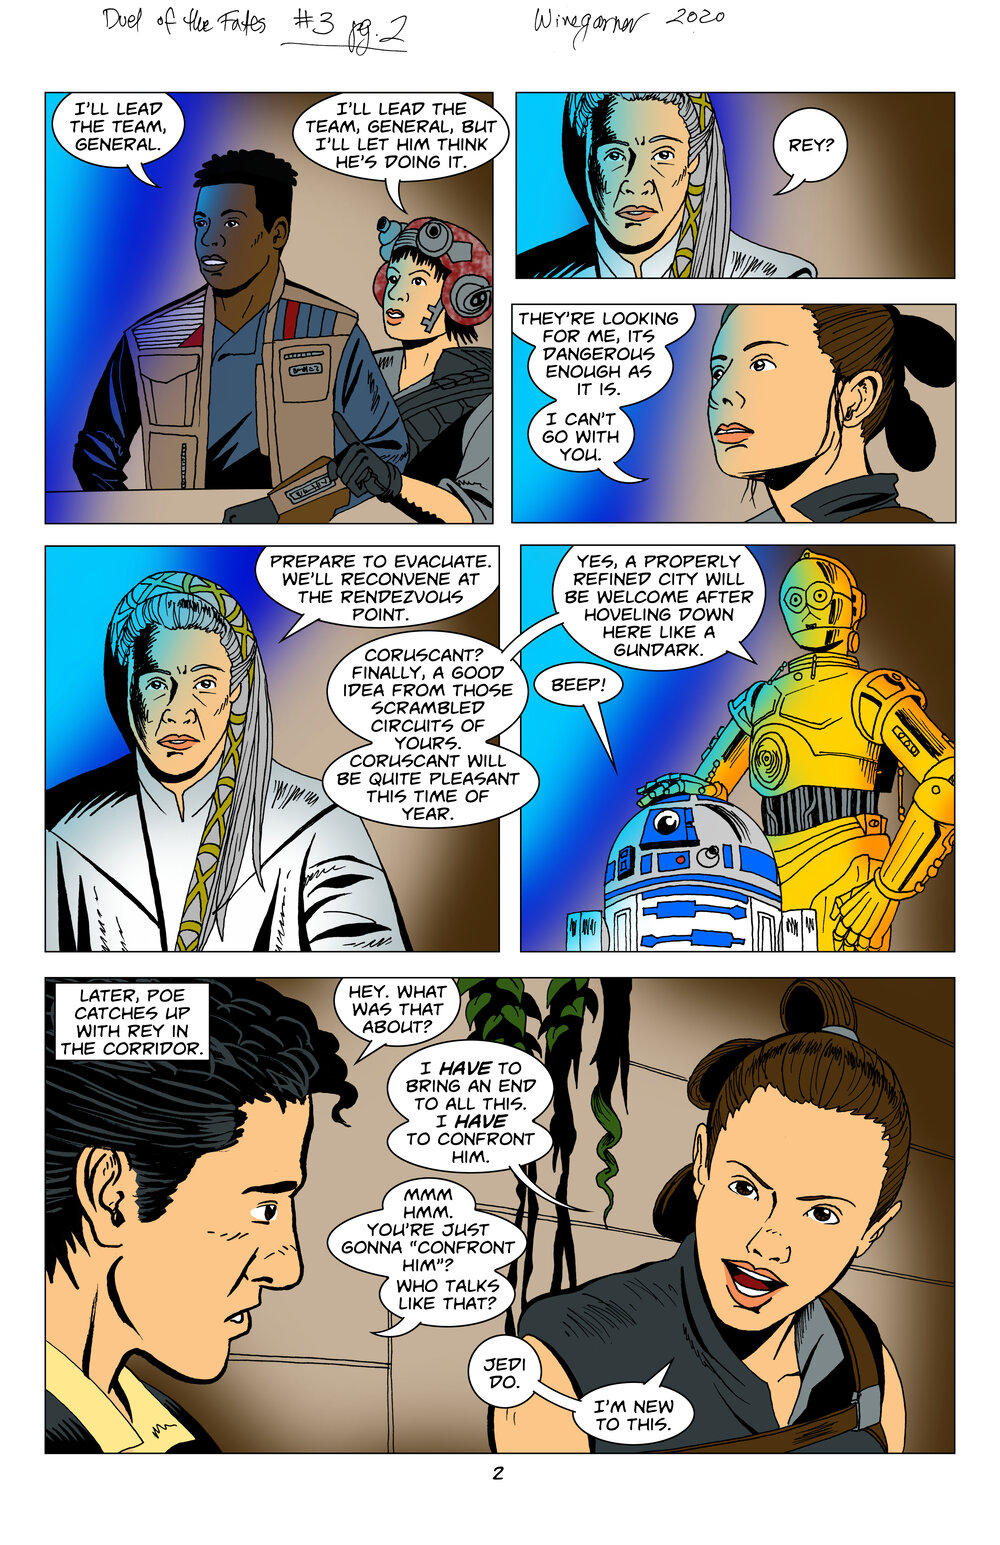 Star Wars: Duel of the Fates (2020-2021): Chapter 3 - Page 3